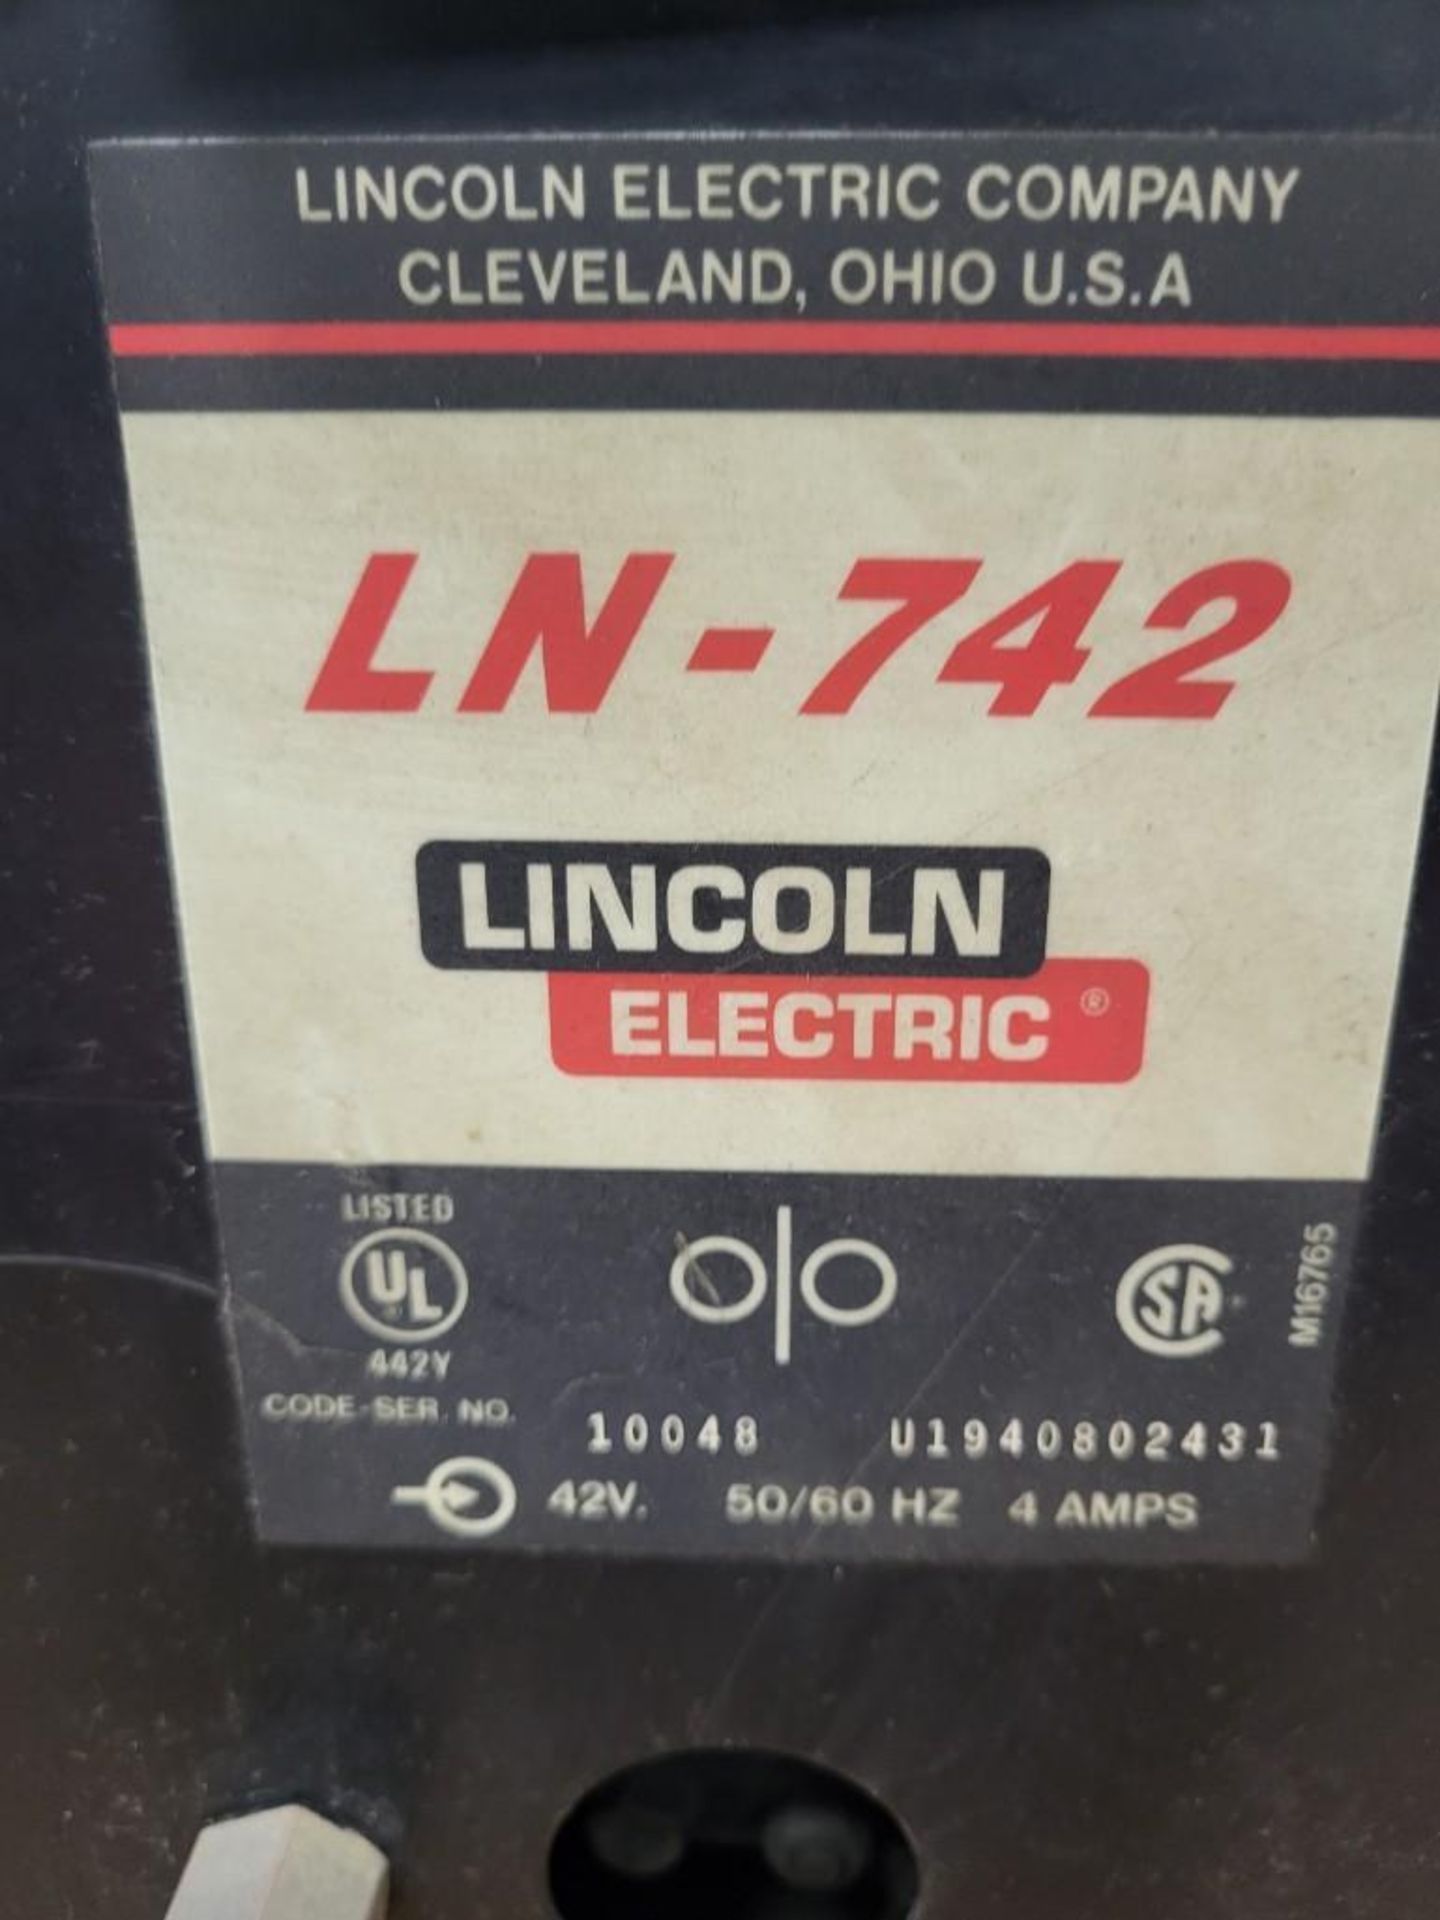 LINCOLN ELECTRIC INVERTEC STT MIG WELDER WITH LN-742 WIREFEEDER - Image 7 of 9